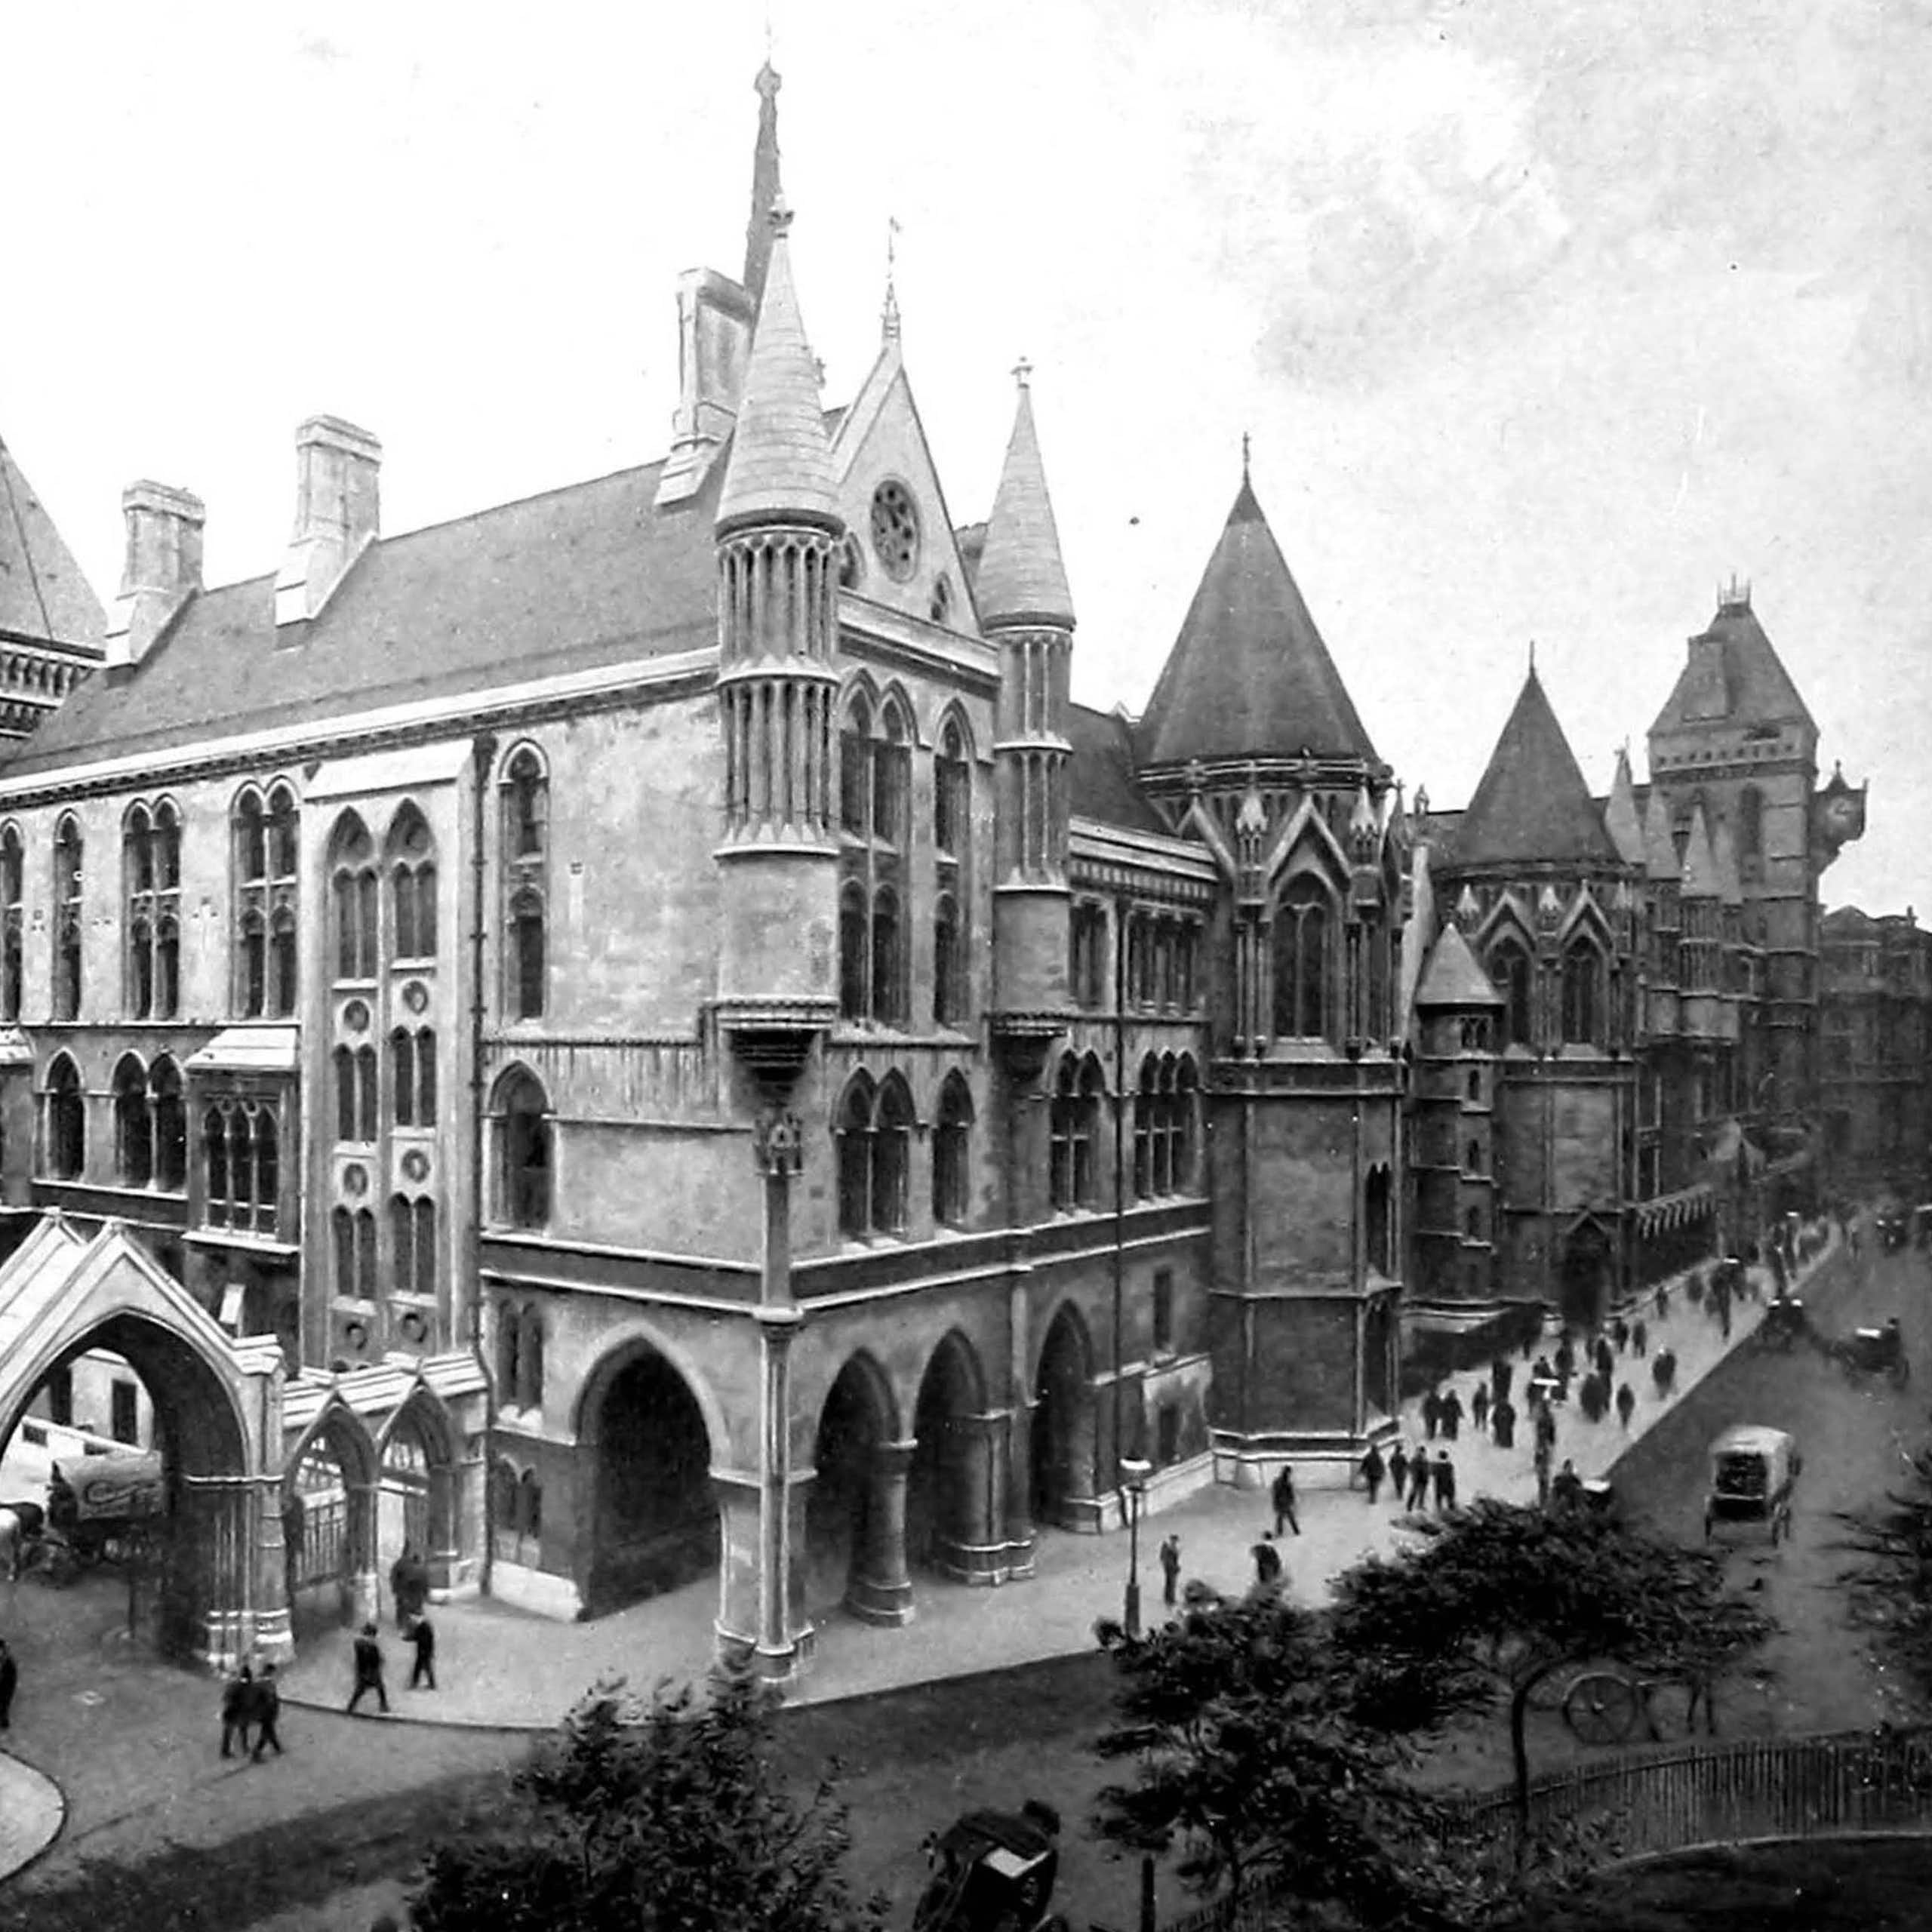 An archival photograph in black and white of a Victorian building complex.